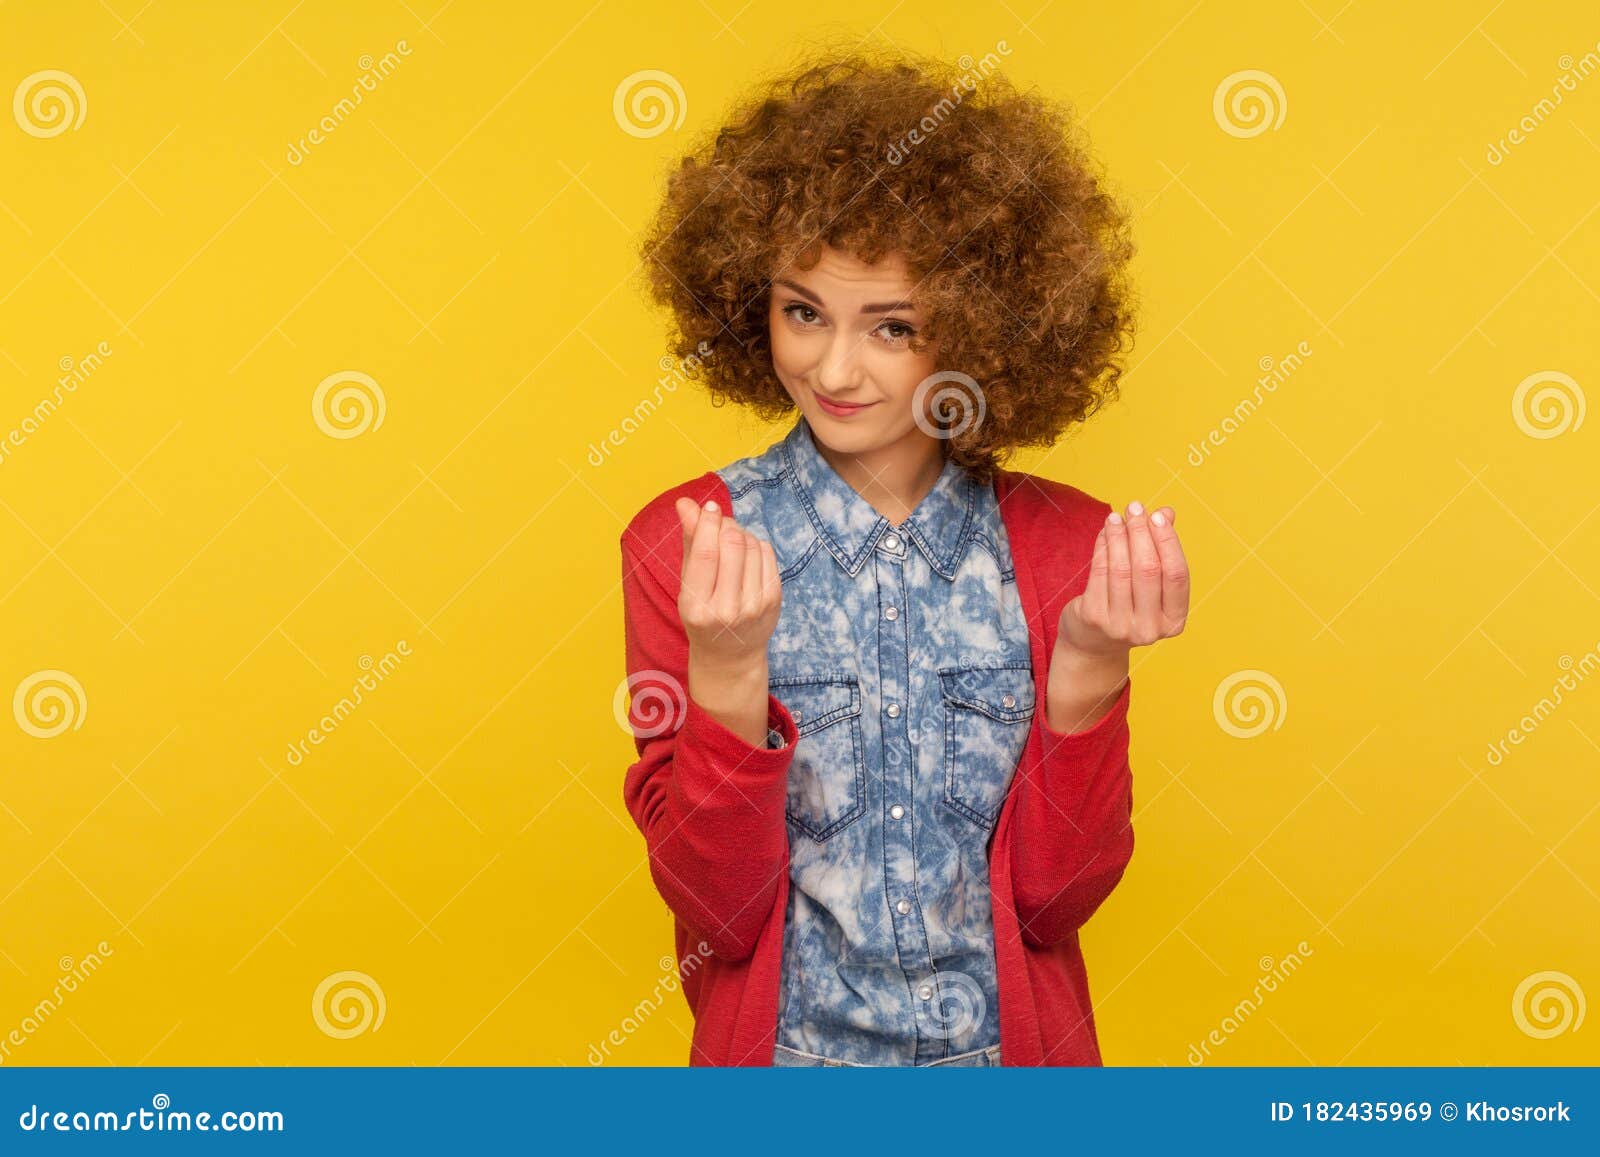 Give Me Cash! Portrait of Enterprising Woman with Curly Hair Showing ...